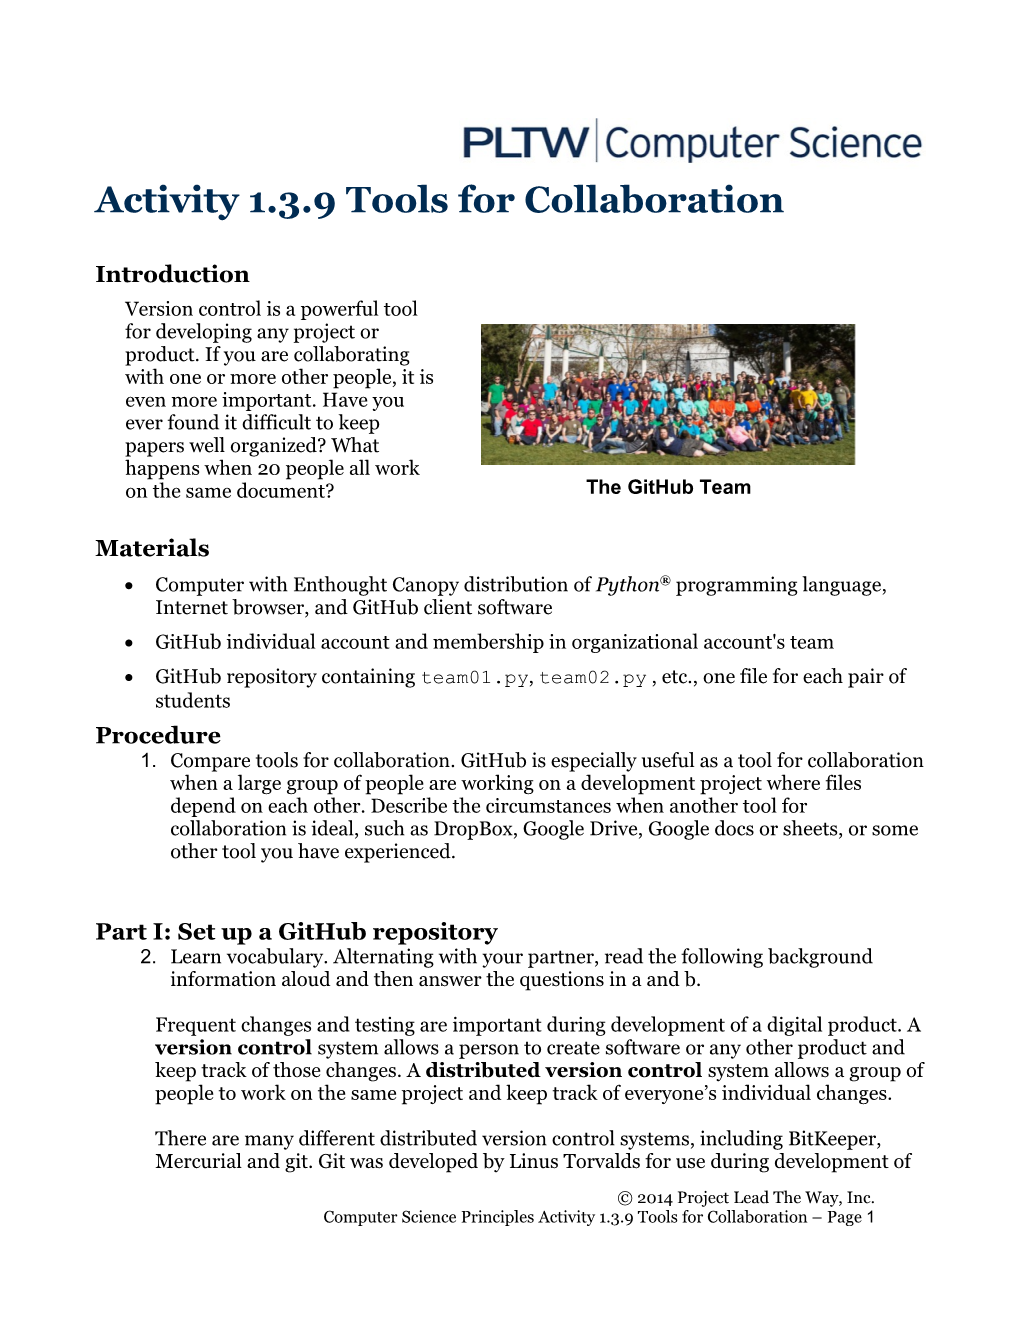 1.3.9 Tools for Collaboration